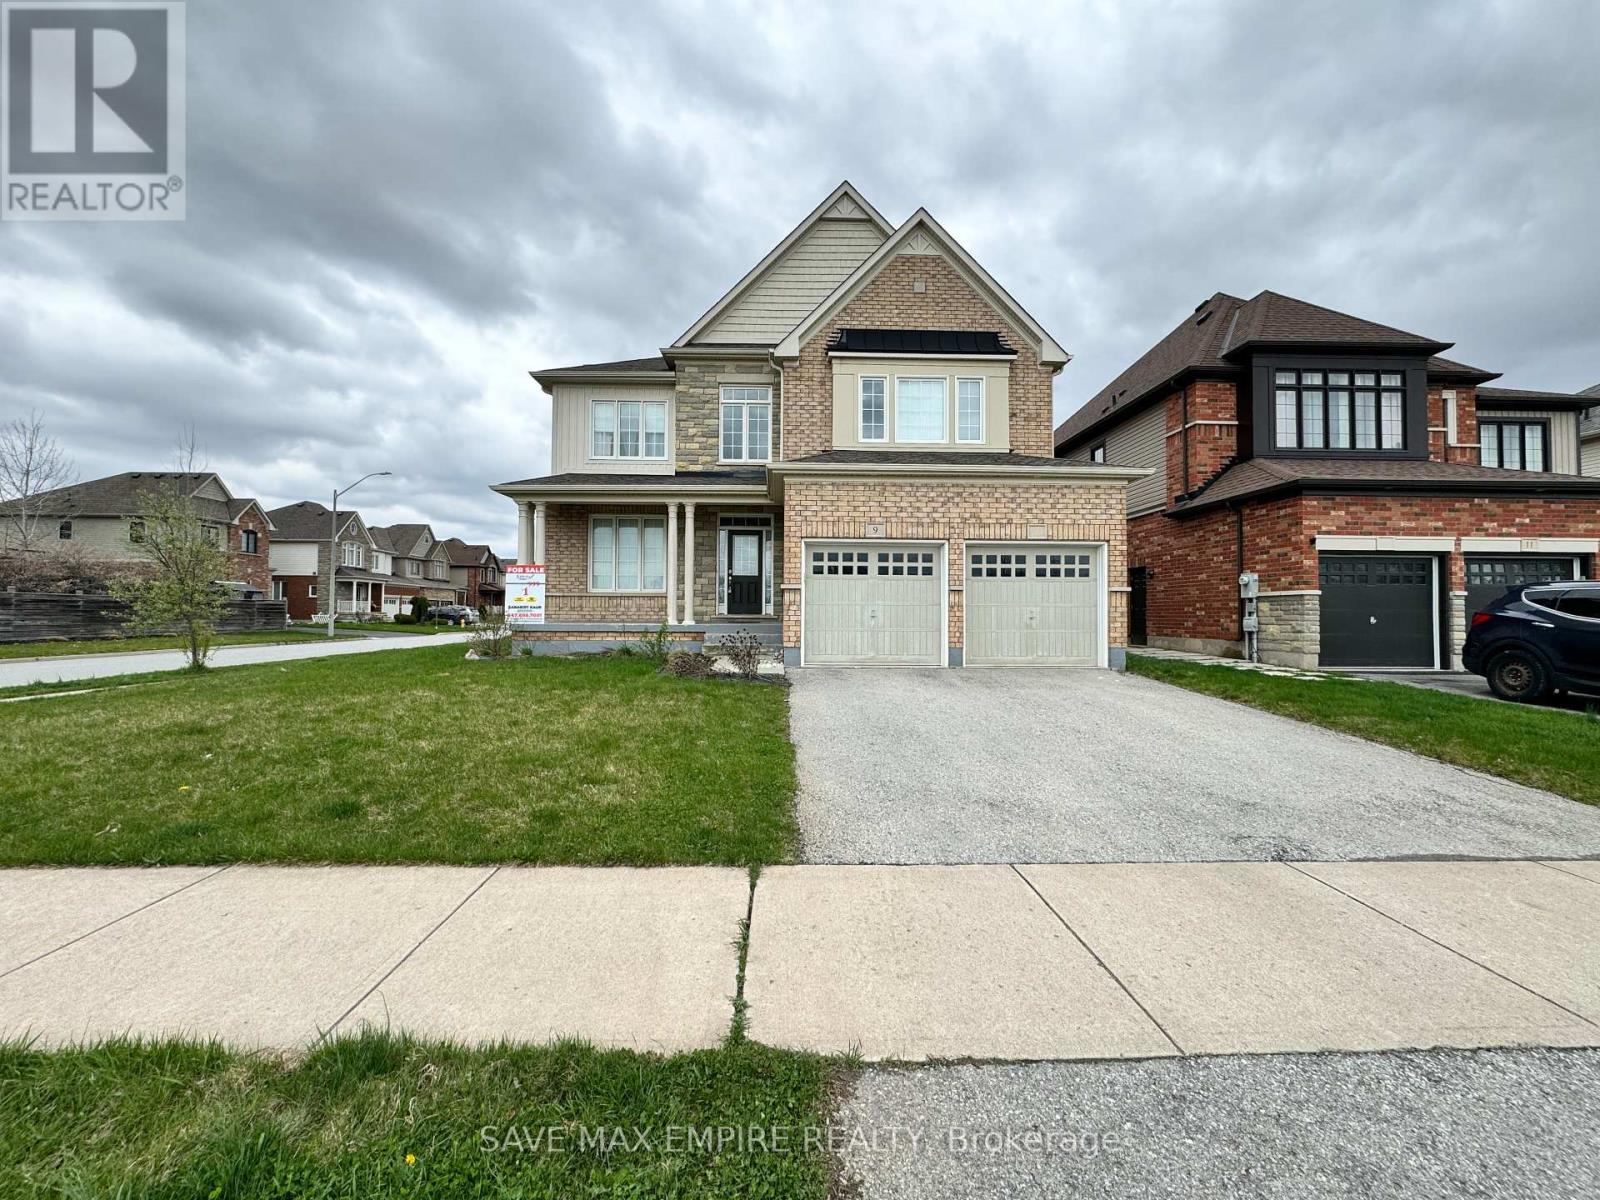 9 SUNSET WAY located in Thorold, Ontario